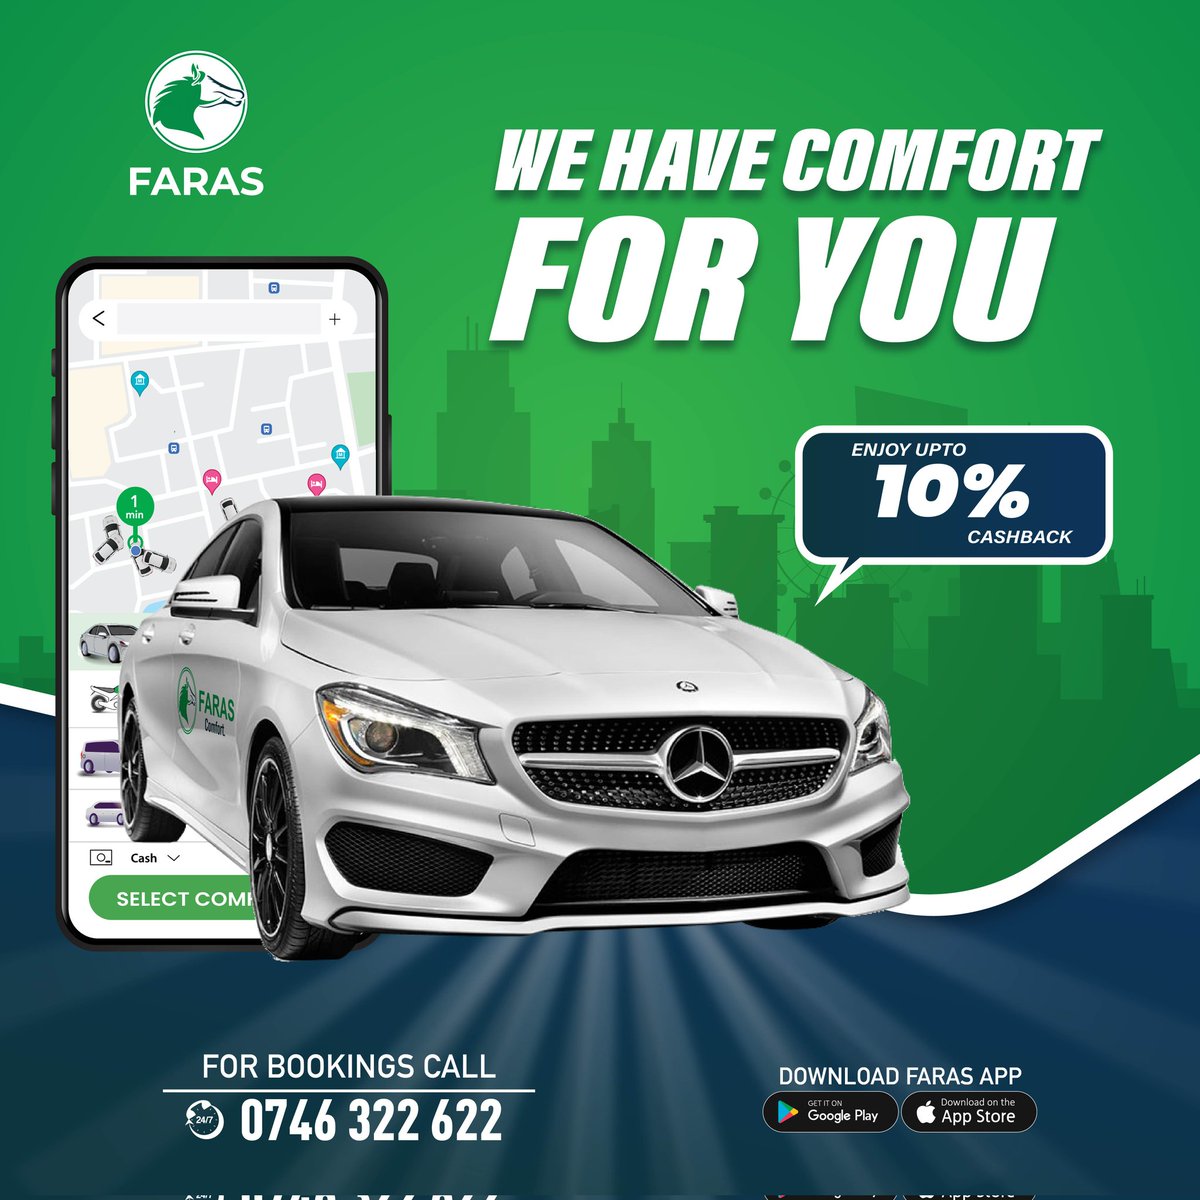 Choose @farasKenya for an eco-friendly travel option. We offer vehicles with lower emissions, contributing to a cleaner and greener environment. #FarasIsForYou